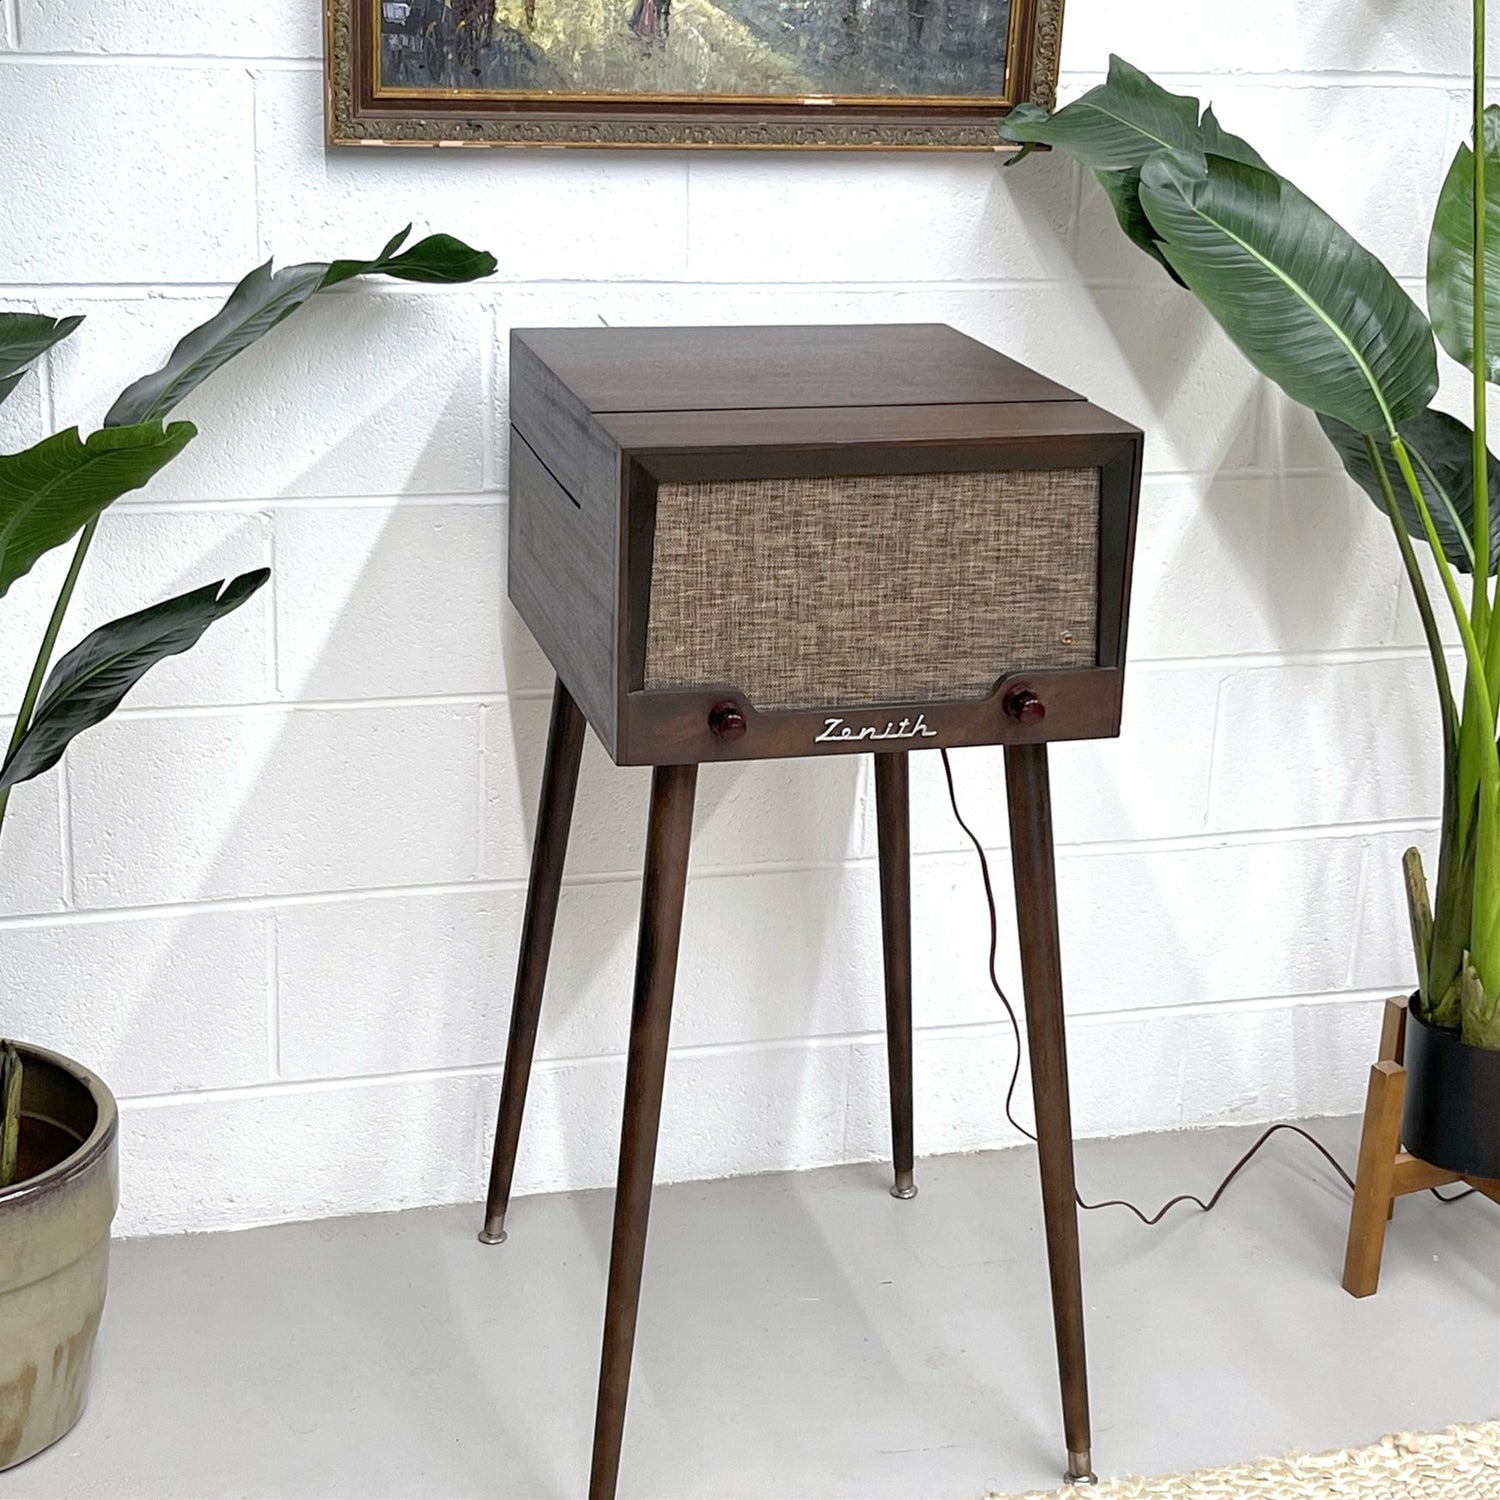 ZENITH Mid Century 50s Record Player Changer The Vintedge Co.